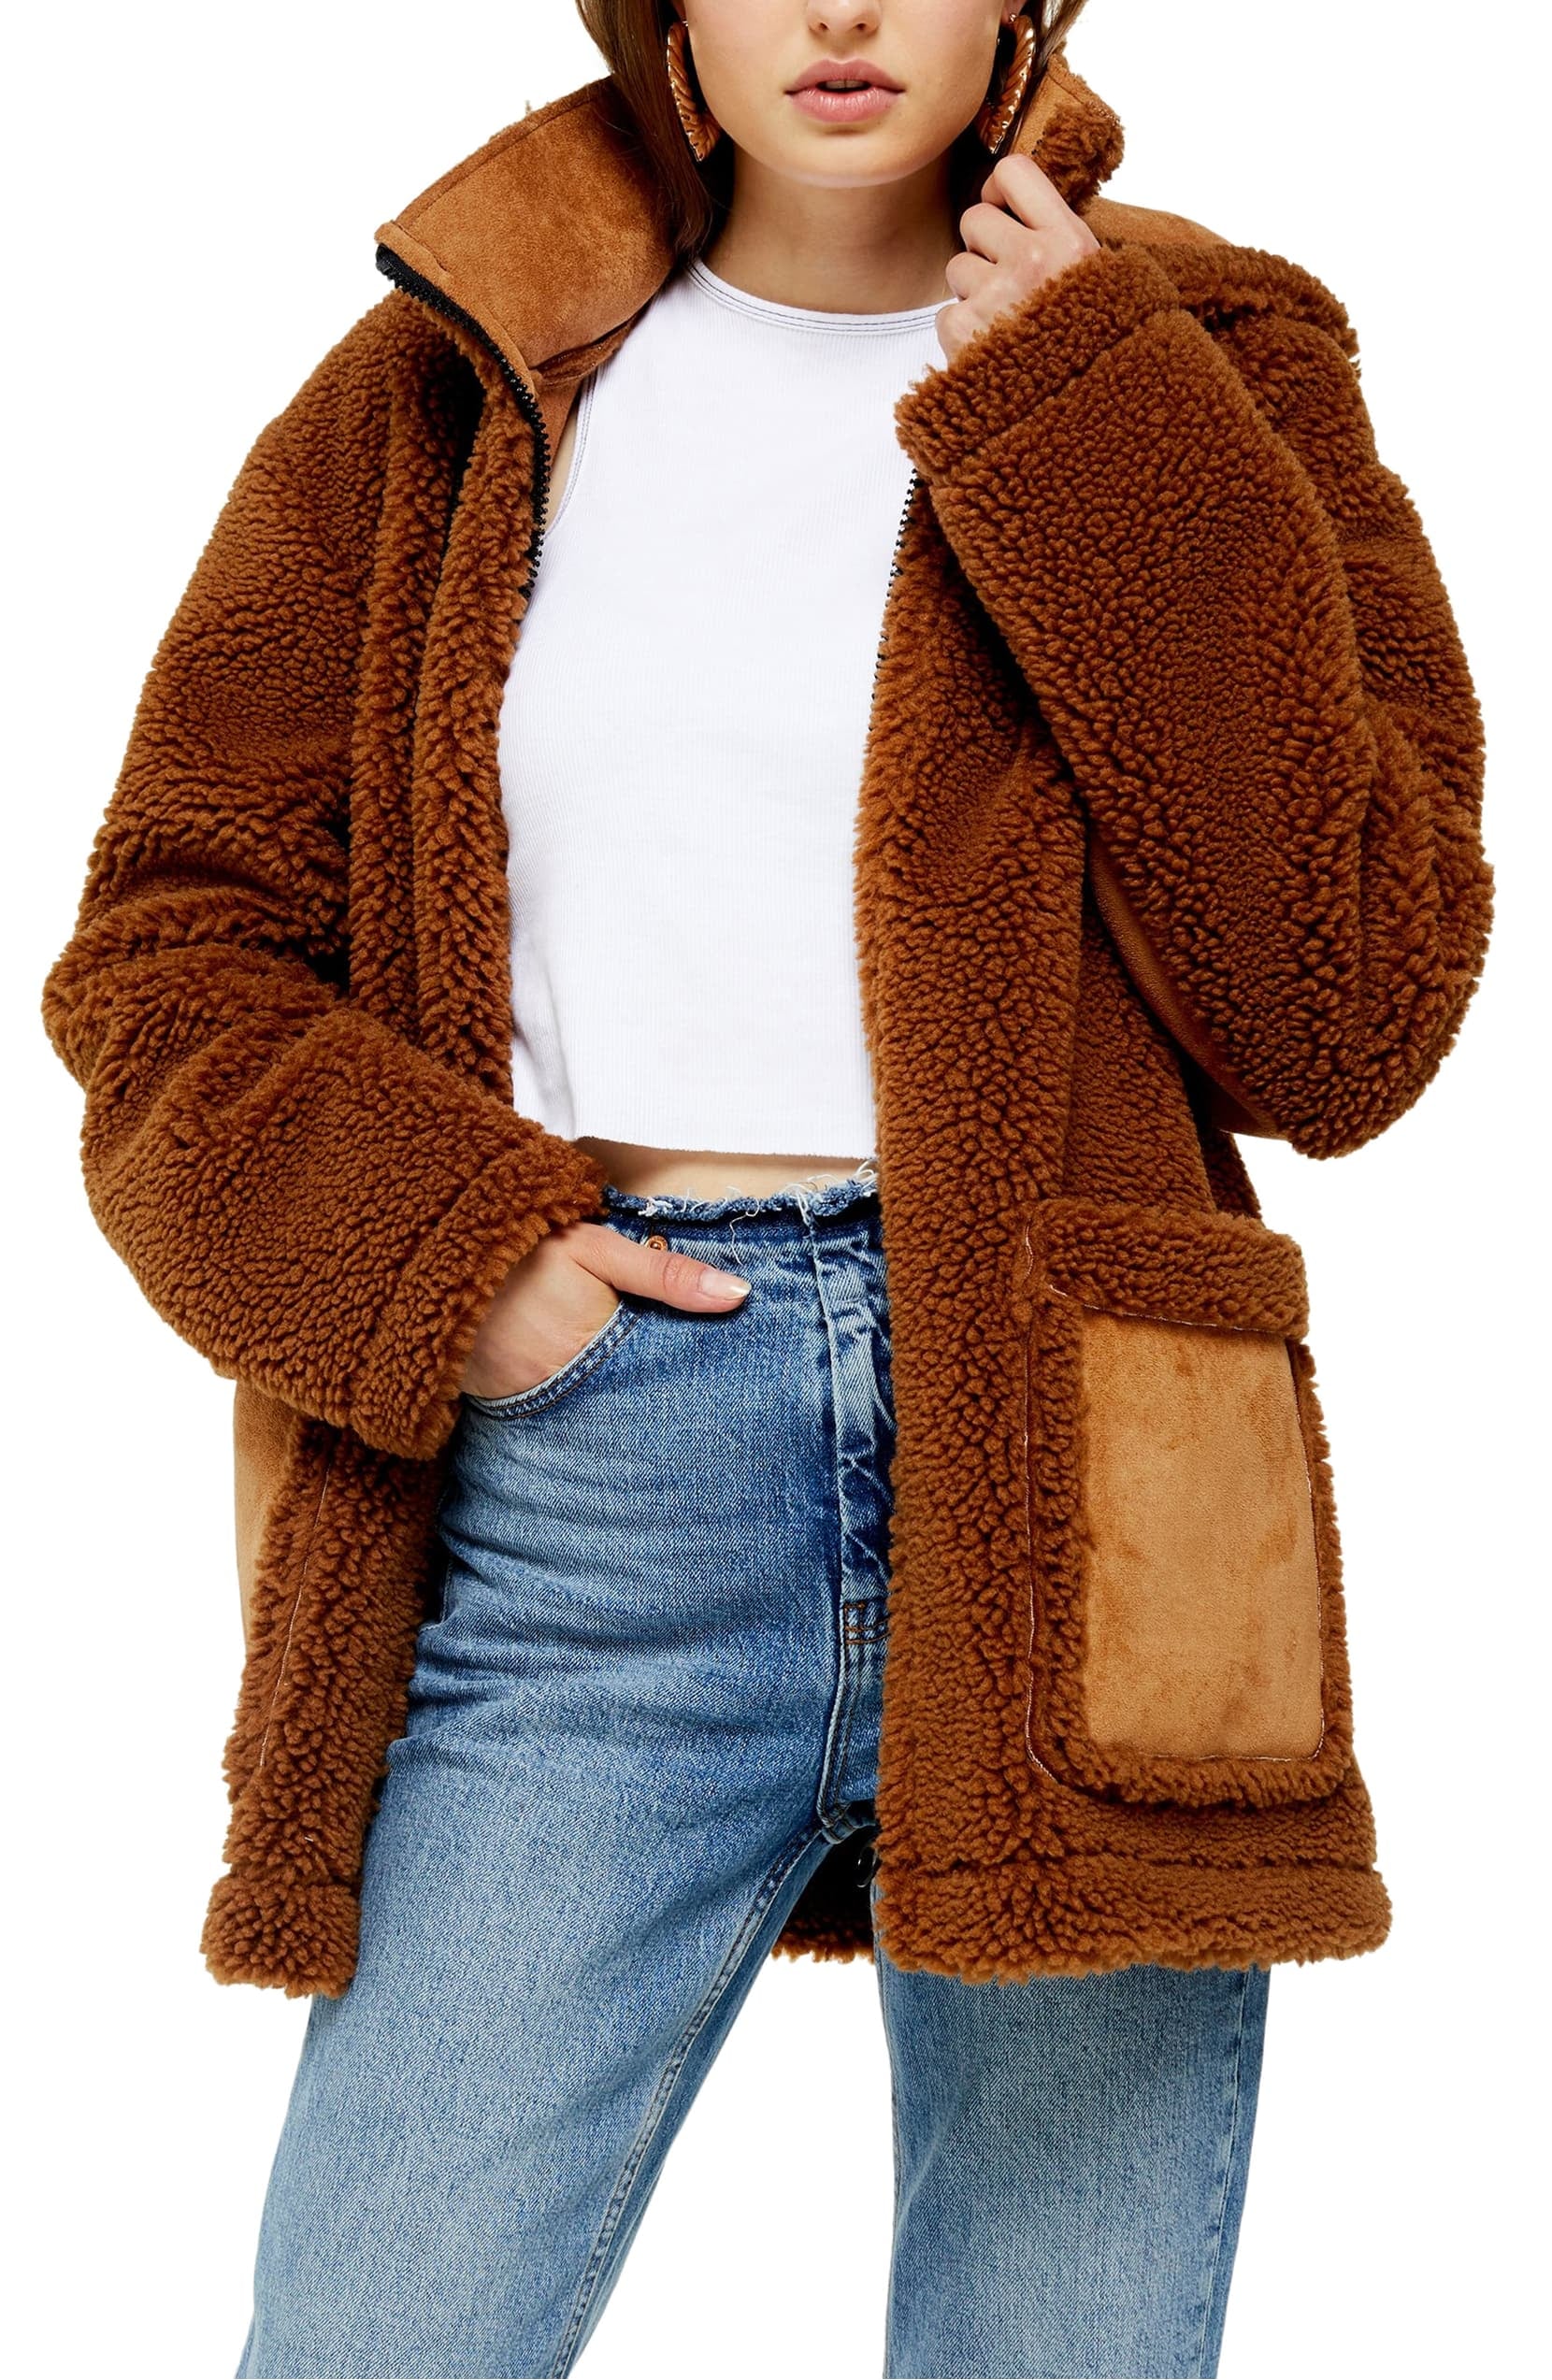 SINCERE STYLE FILES: RIHANNA IN CHLOÉ REVERSIBLE SHEARLING COAT